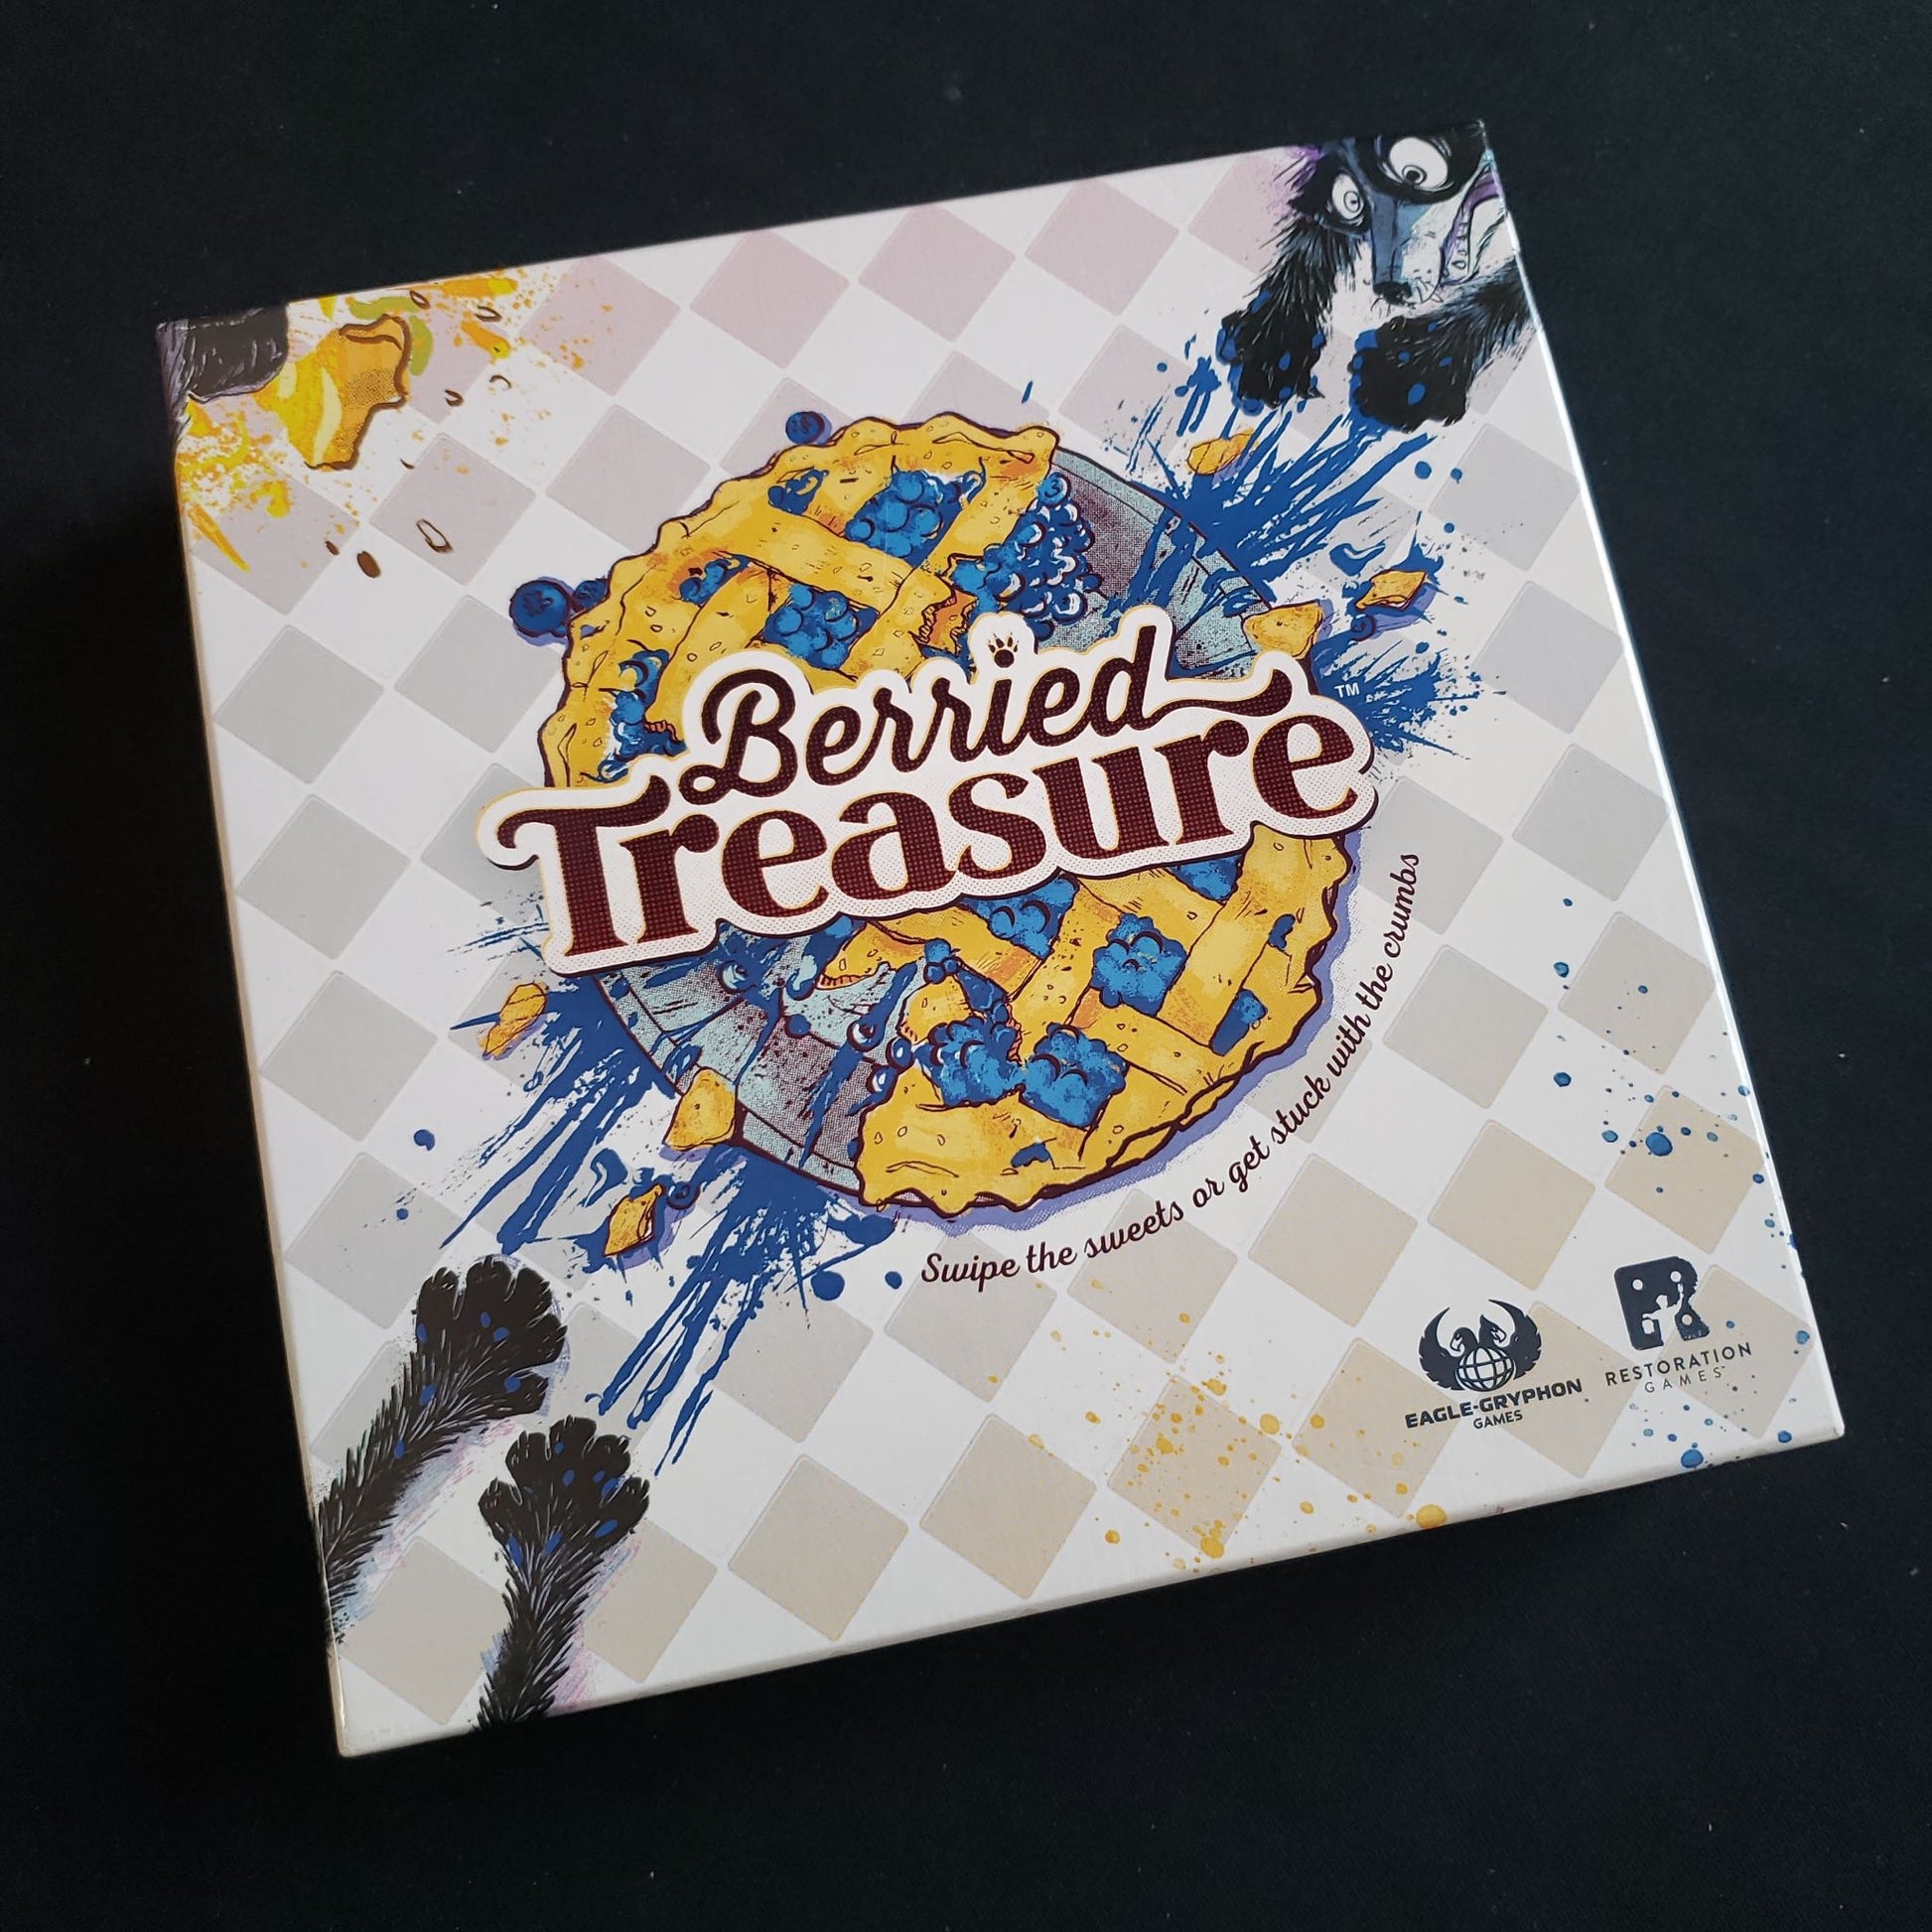 Image shows the front cover of the box of the Berried Treasure card game